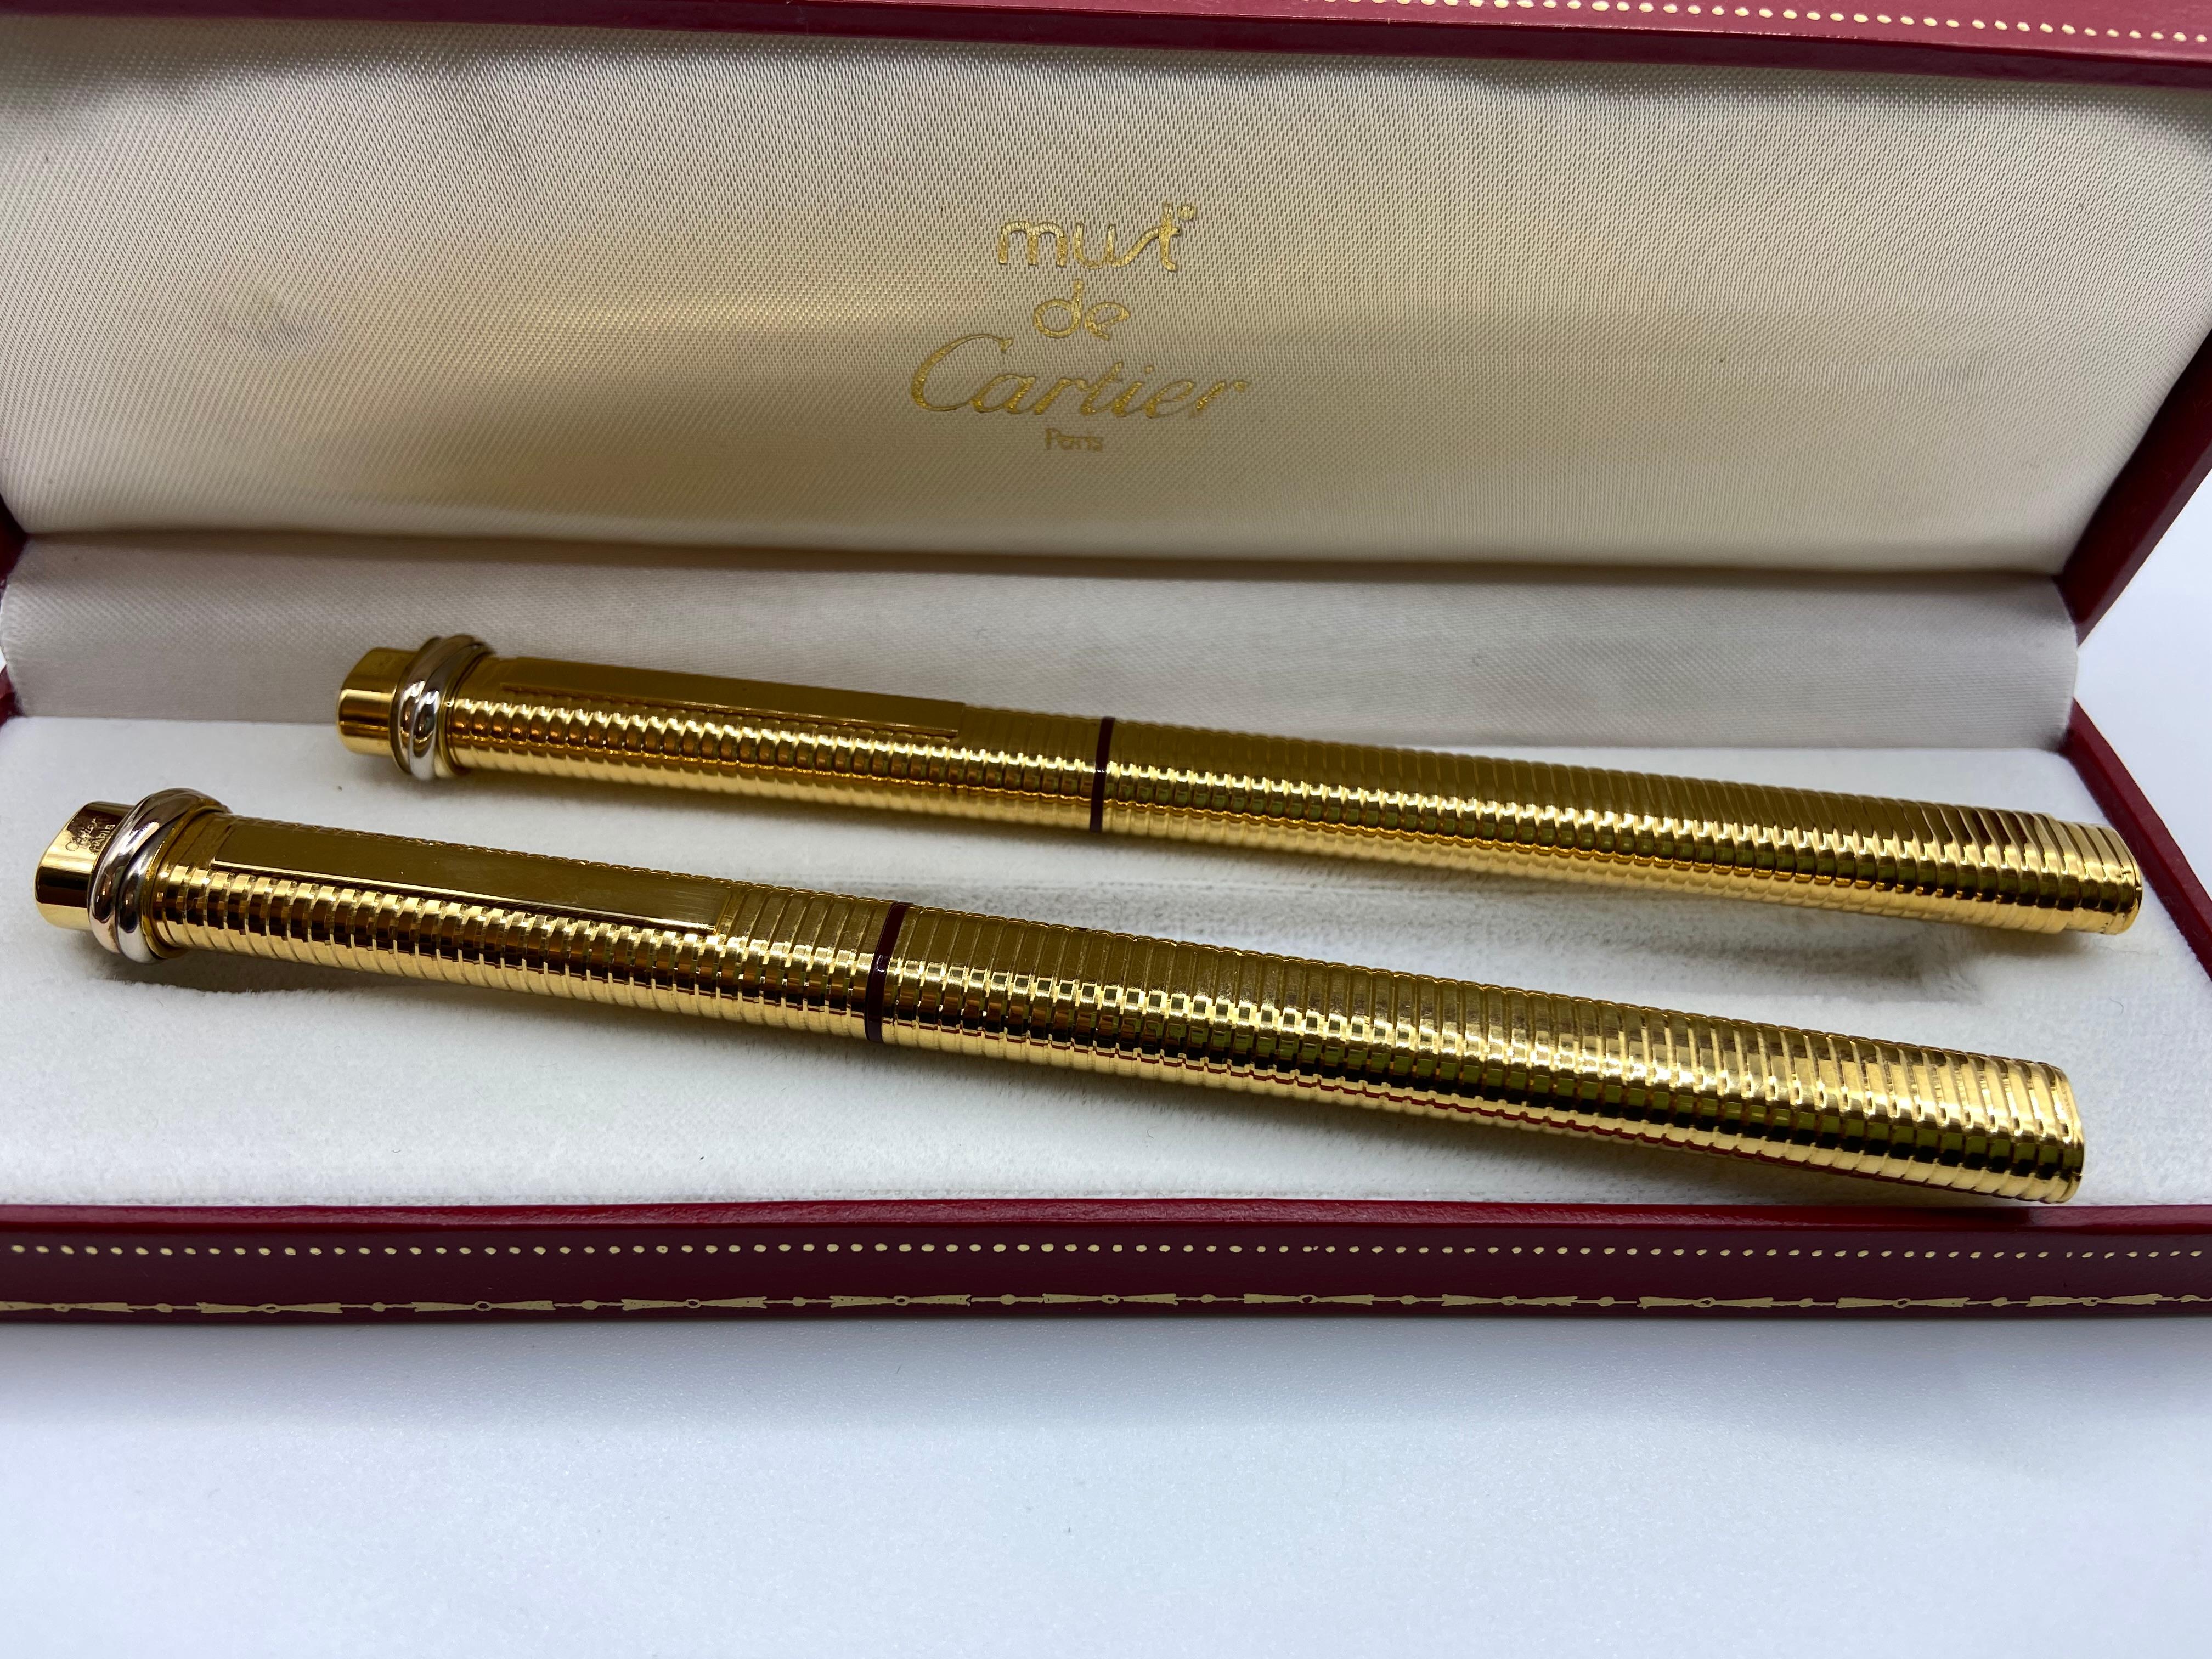 Two Pens, a Fountain Pen and a Roller, Santos by Must de Cartier, 18 Kt Gold Plated 8